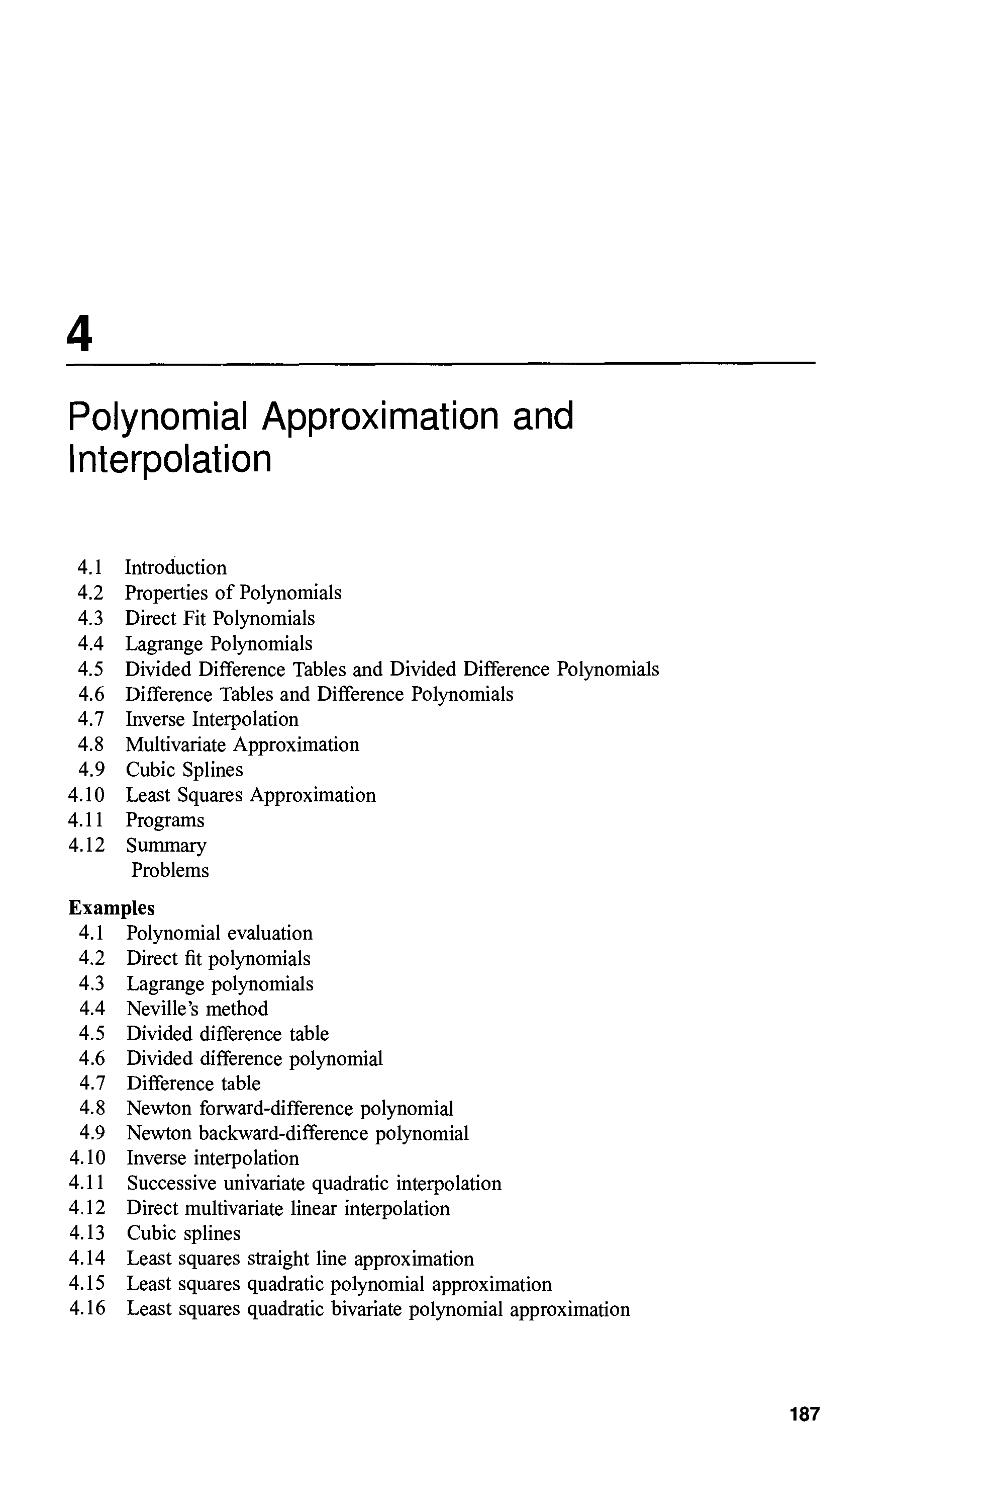 Polynomial Approximation and Interpolation